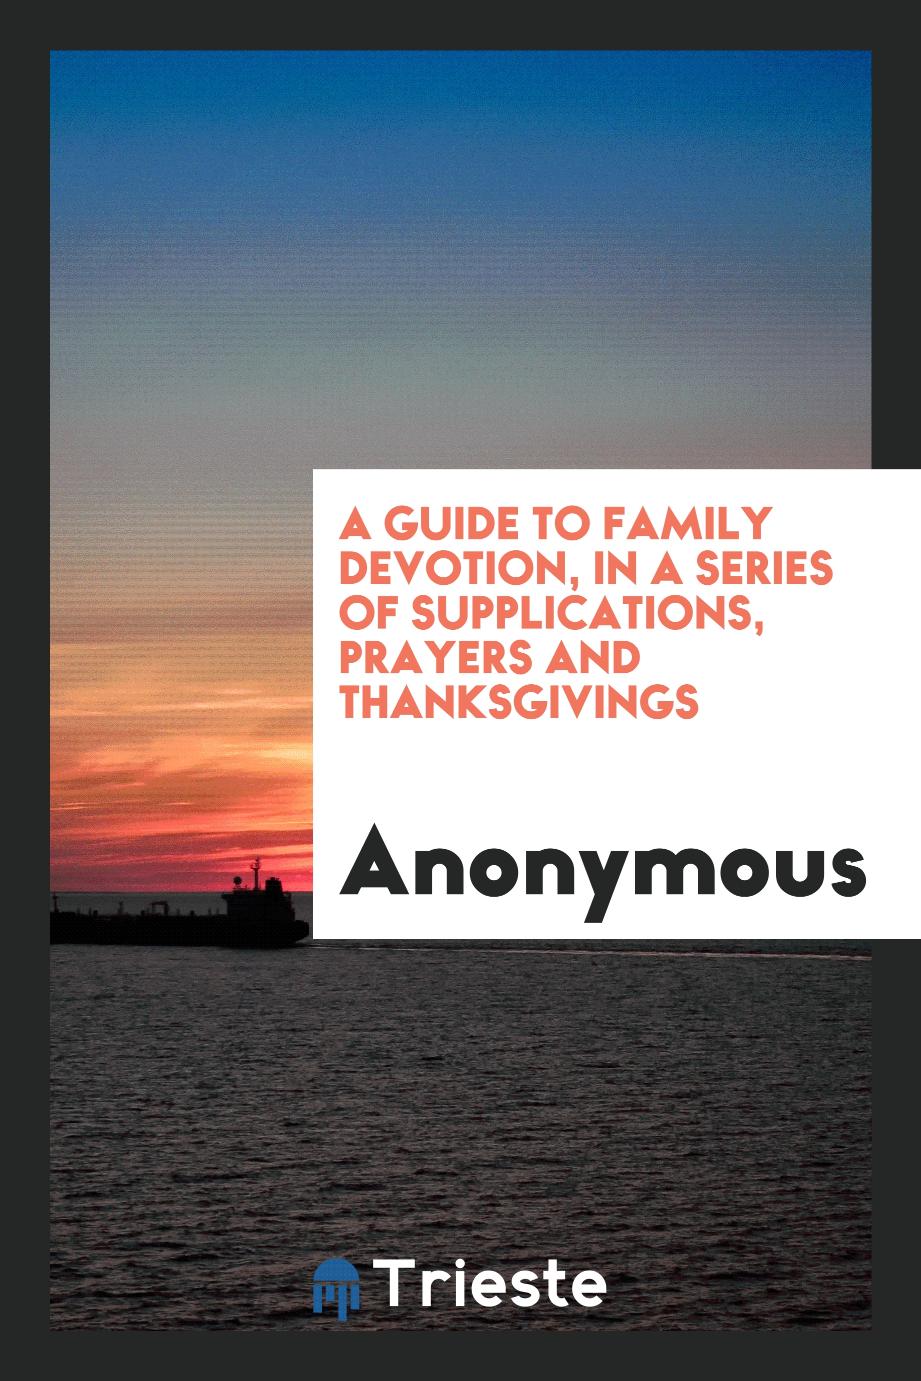 A Guide to Family Devotion, in a Series of Supplications, Prayers and Thanksgivings